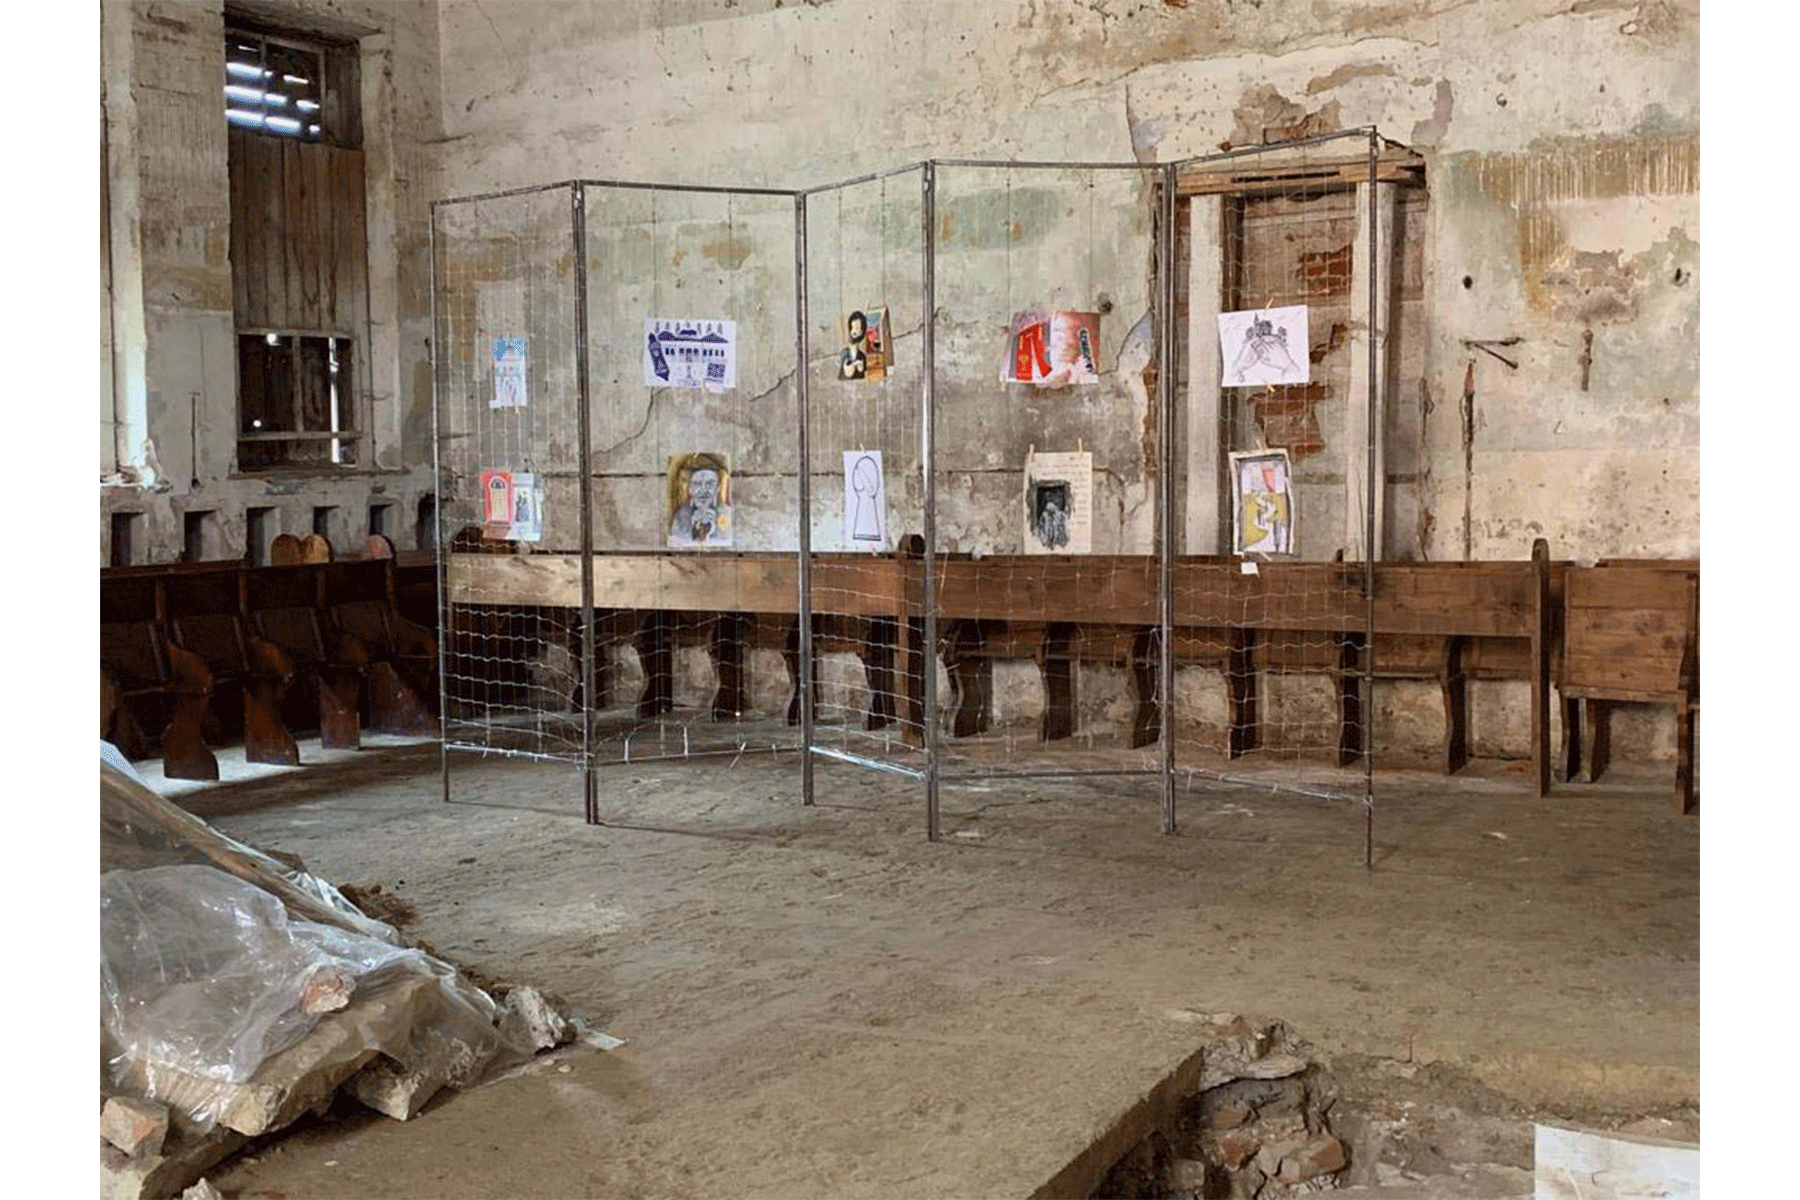 Display of the Artwork Contest submissions inside the Old Synagogue